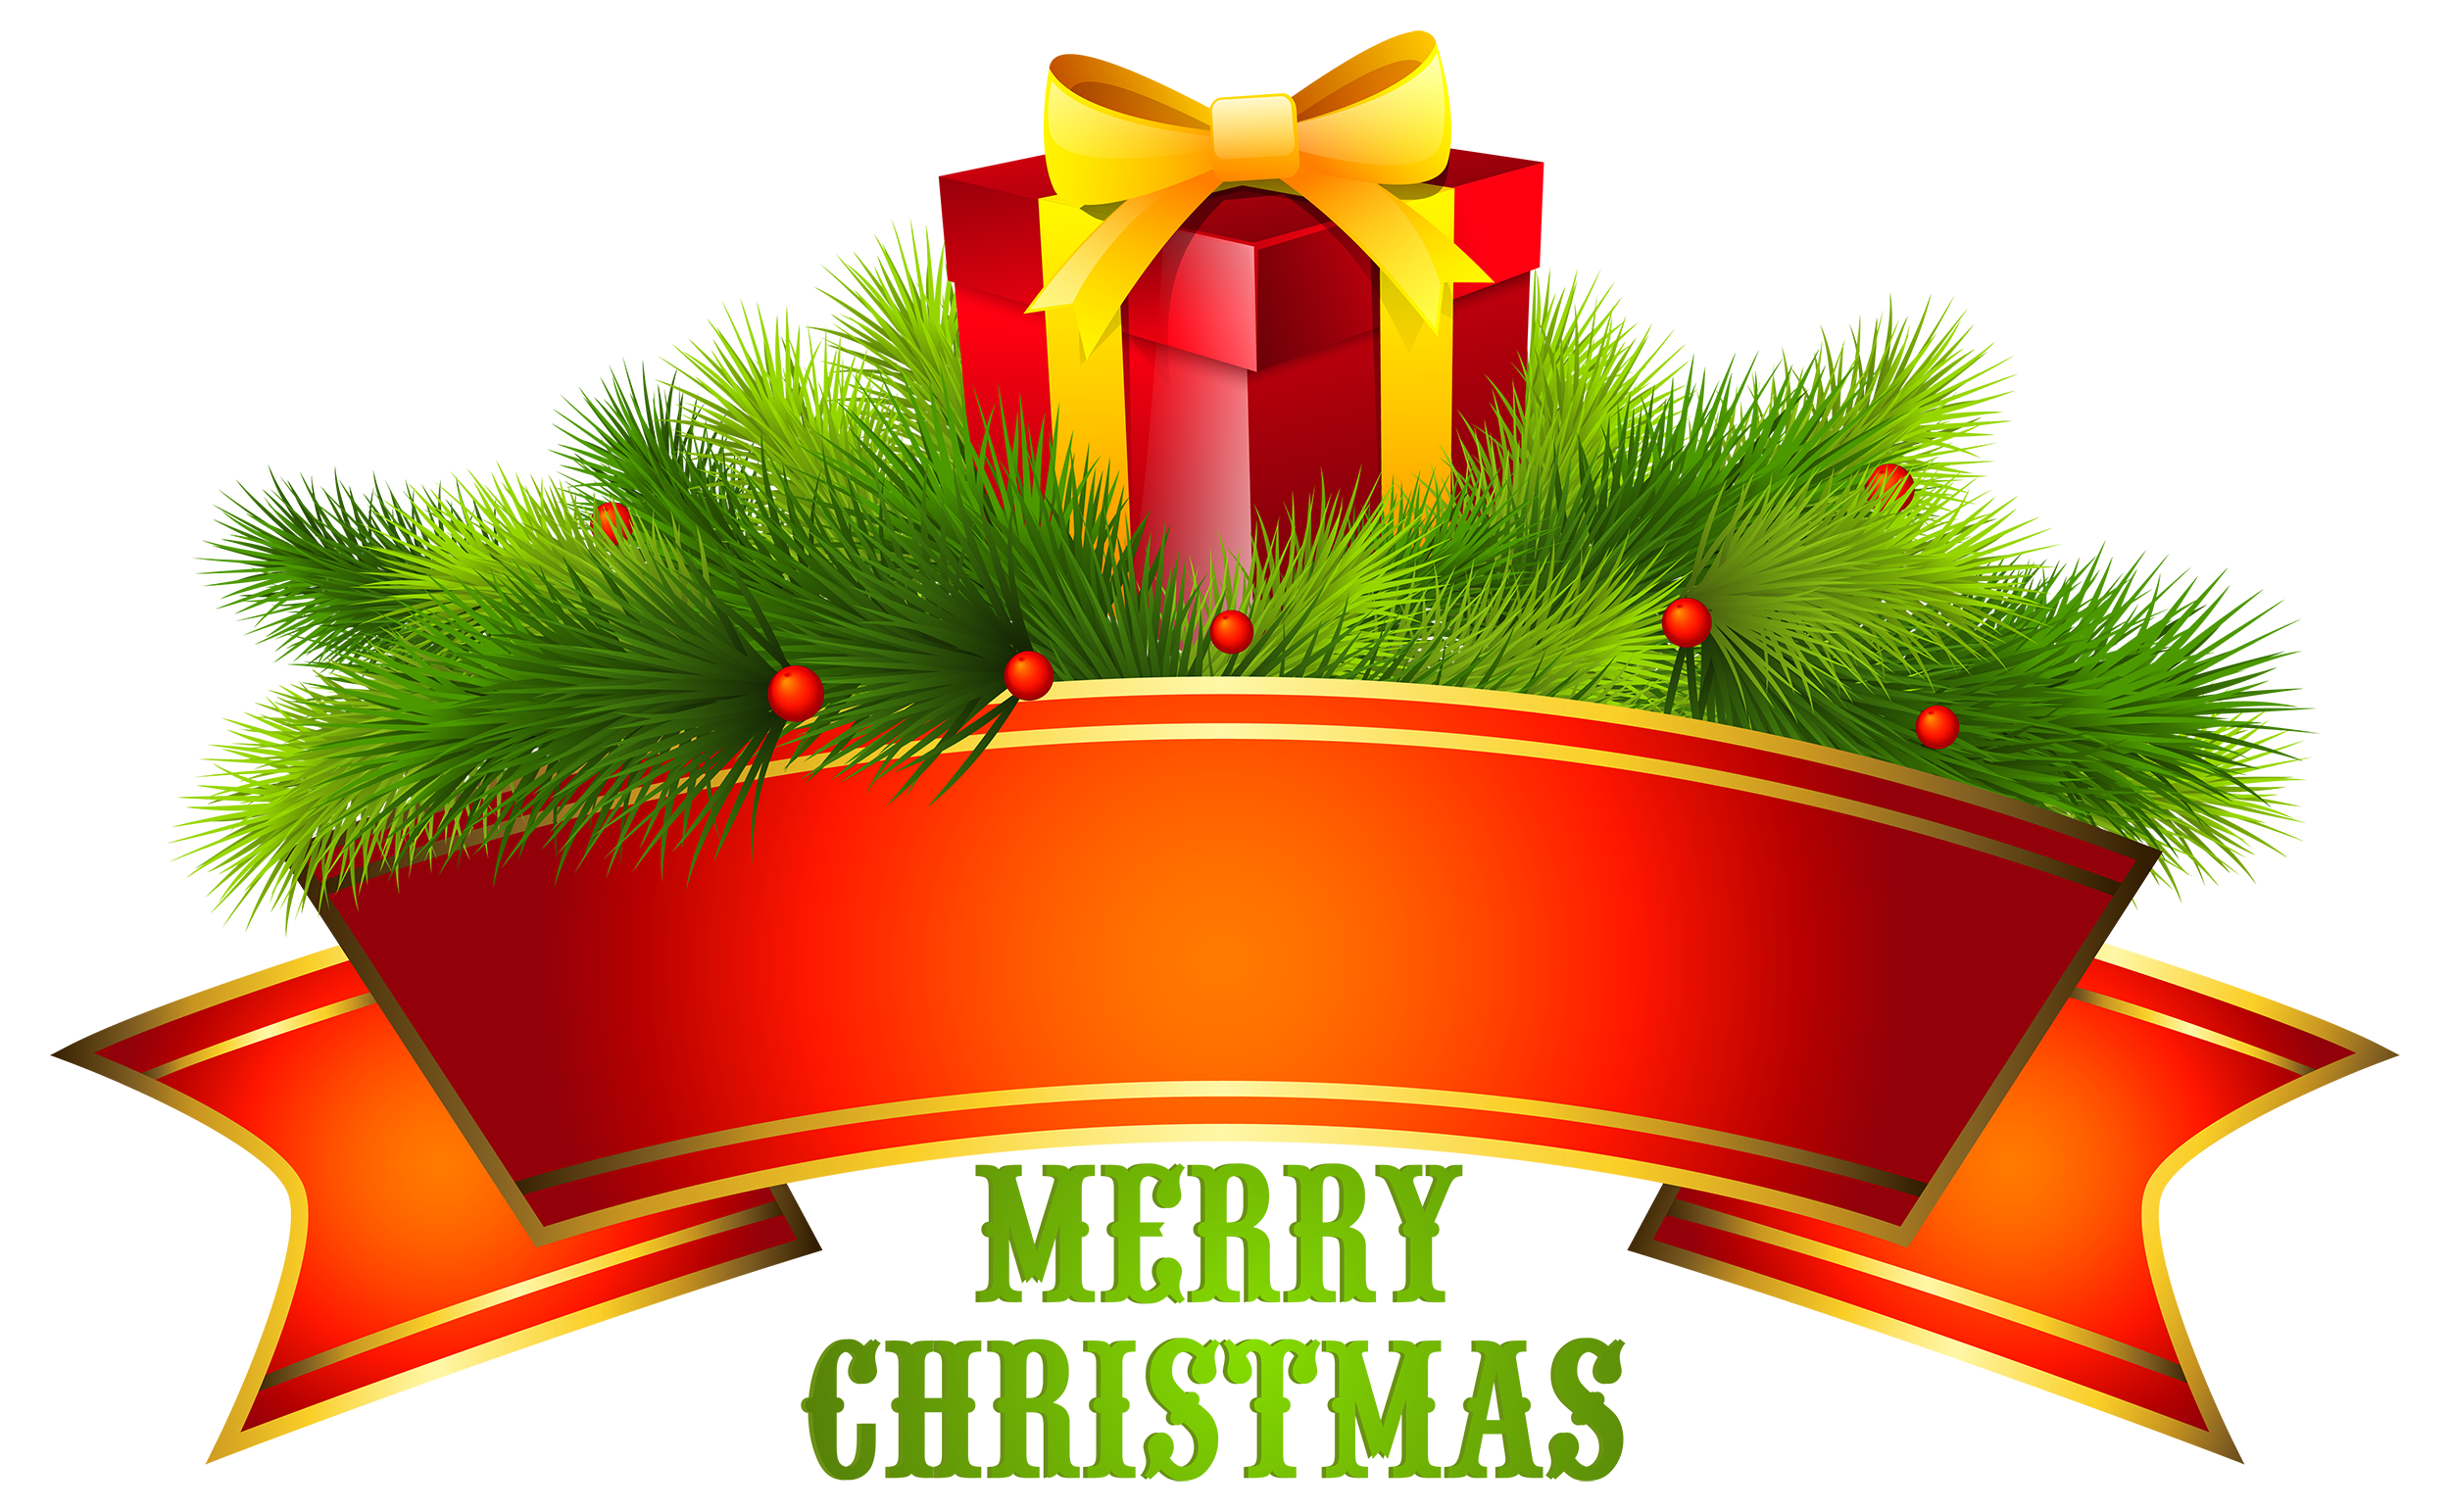 merry christmas and happy new year clip art free - photo #32